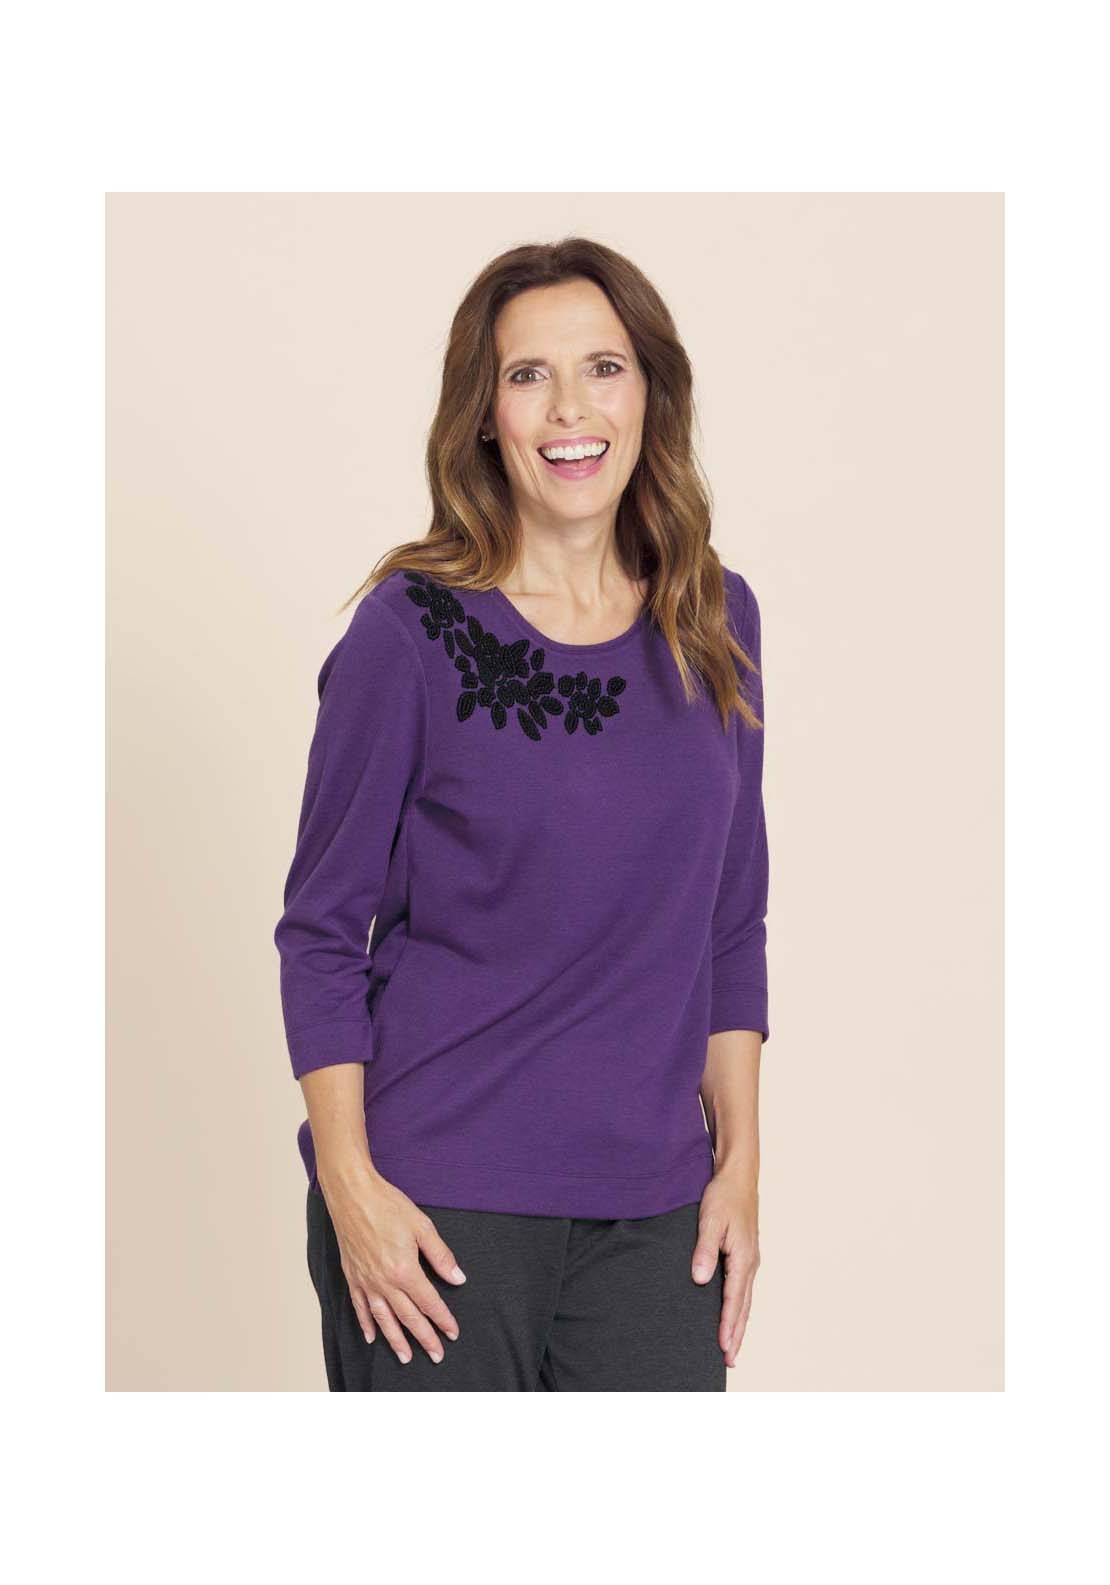 Tigiwear Embellished Lilac Cowl Neck Top 1 Shaws Department Stores